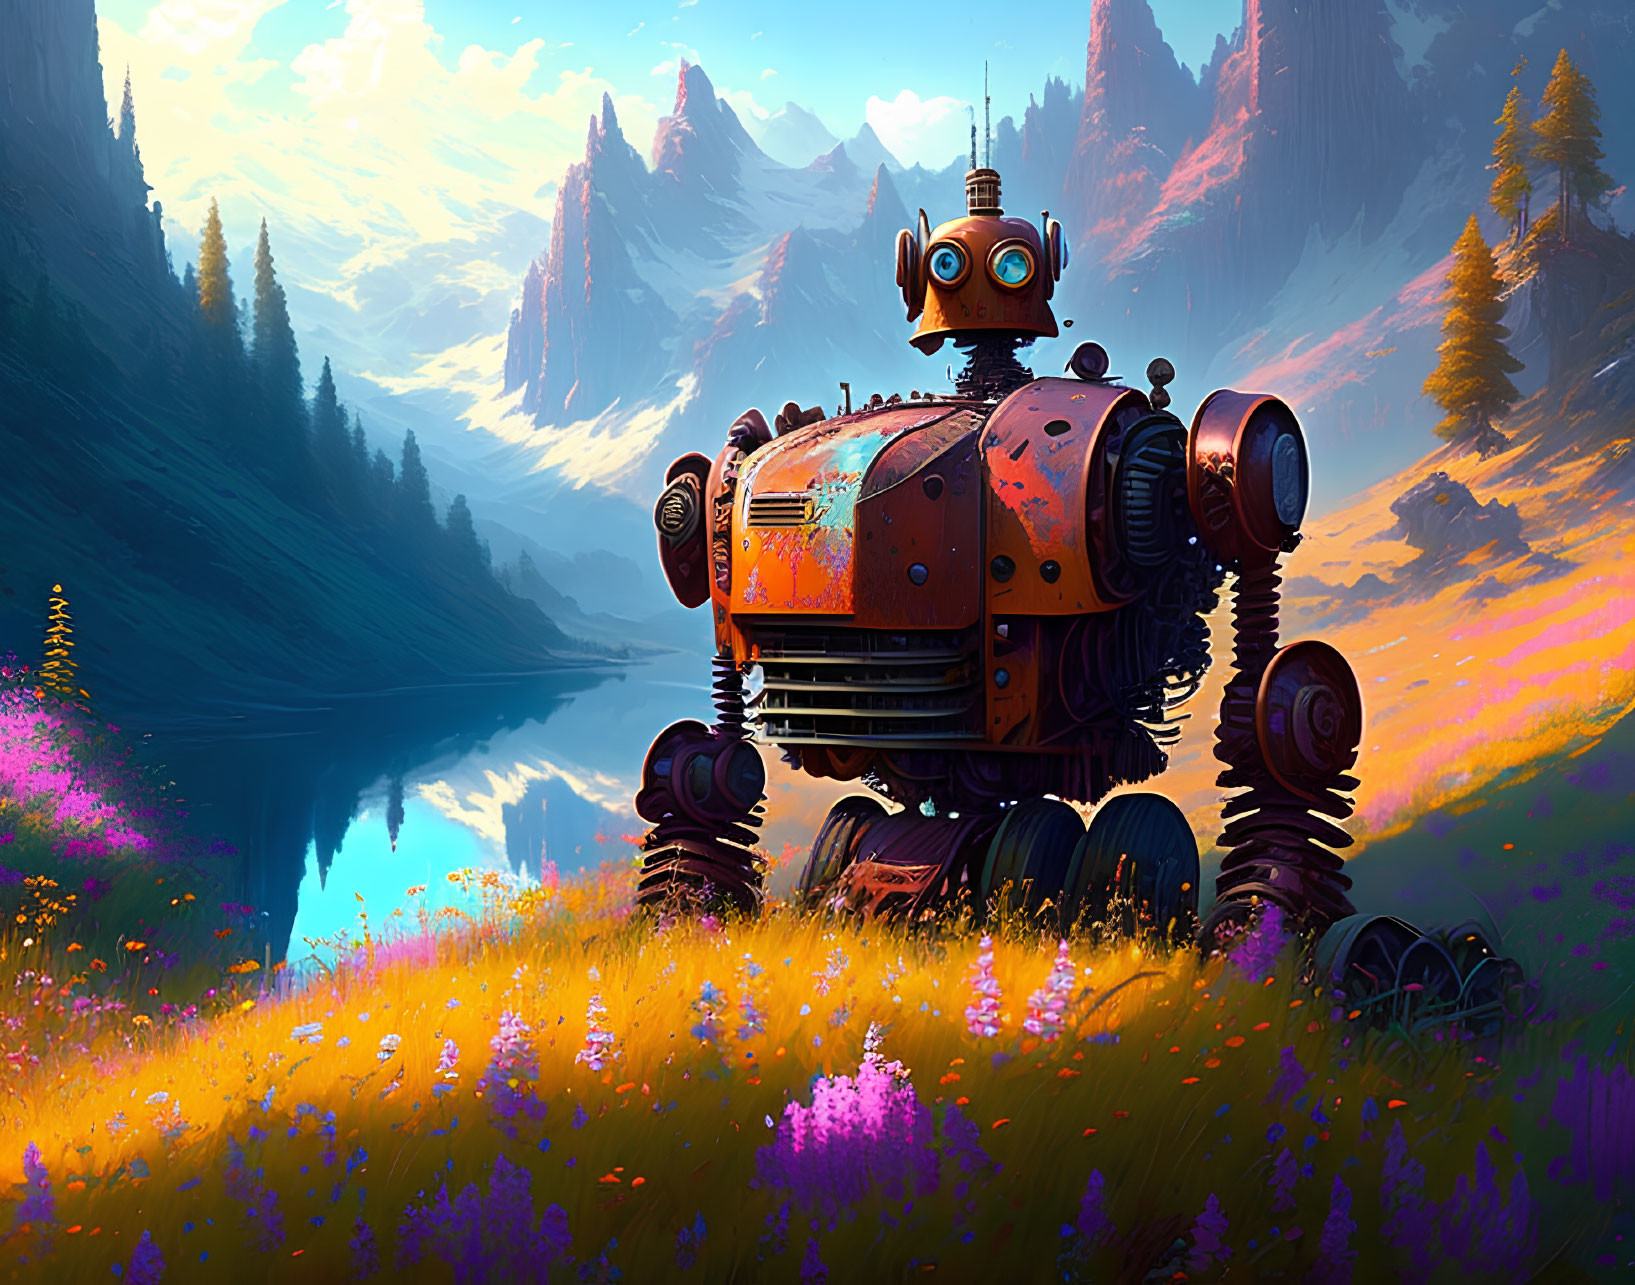 Large Orange Robot in Vibrant Meadow by Calm Lake and Majestic Mountains at Sunset